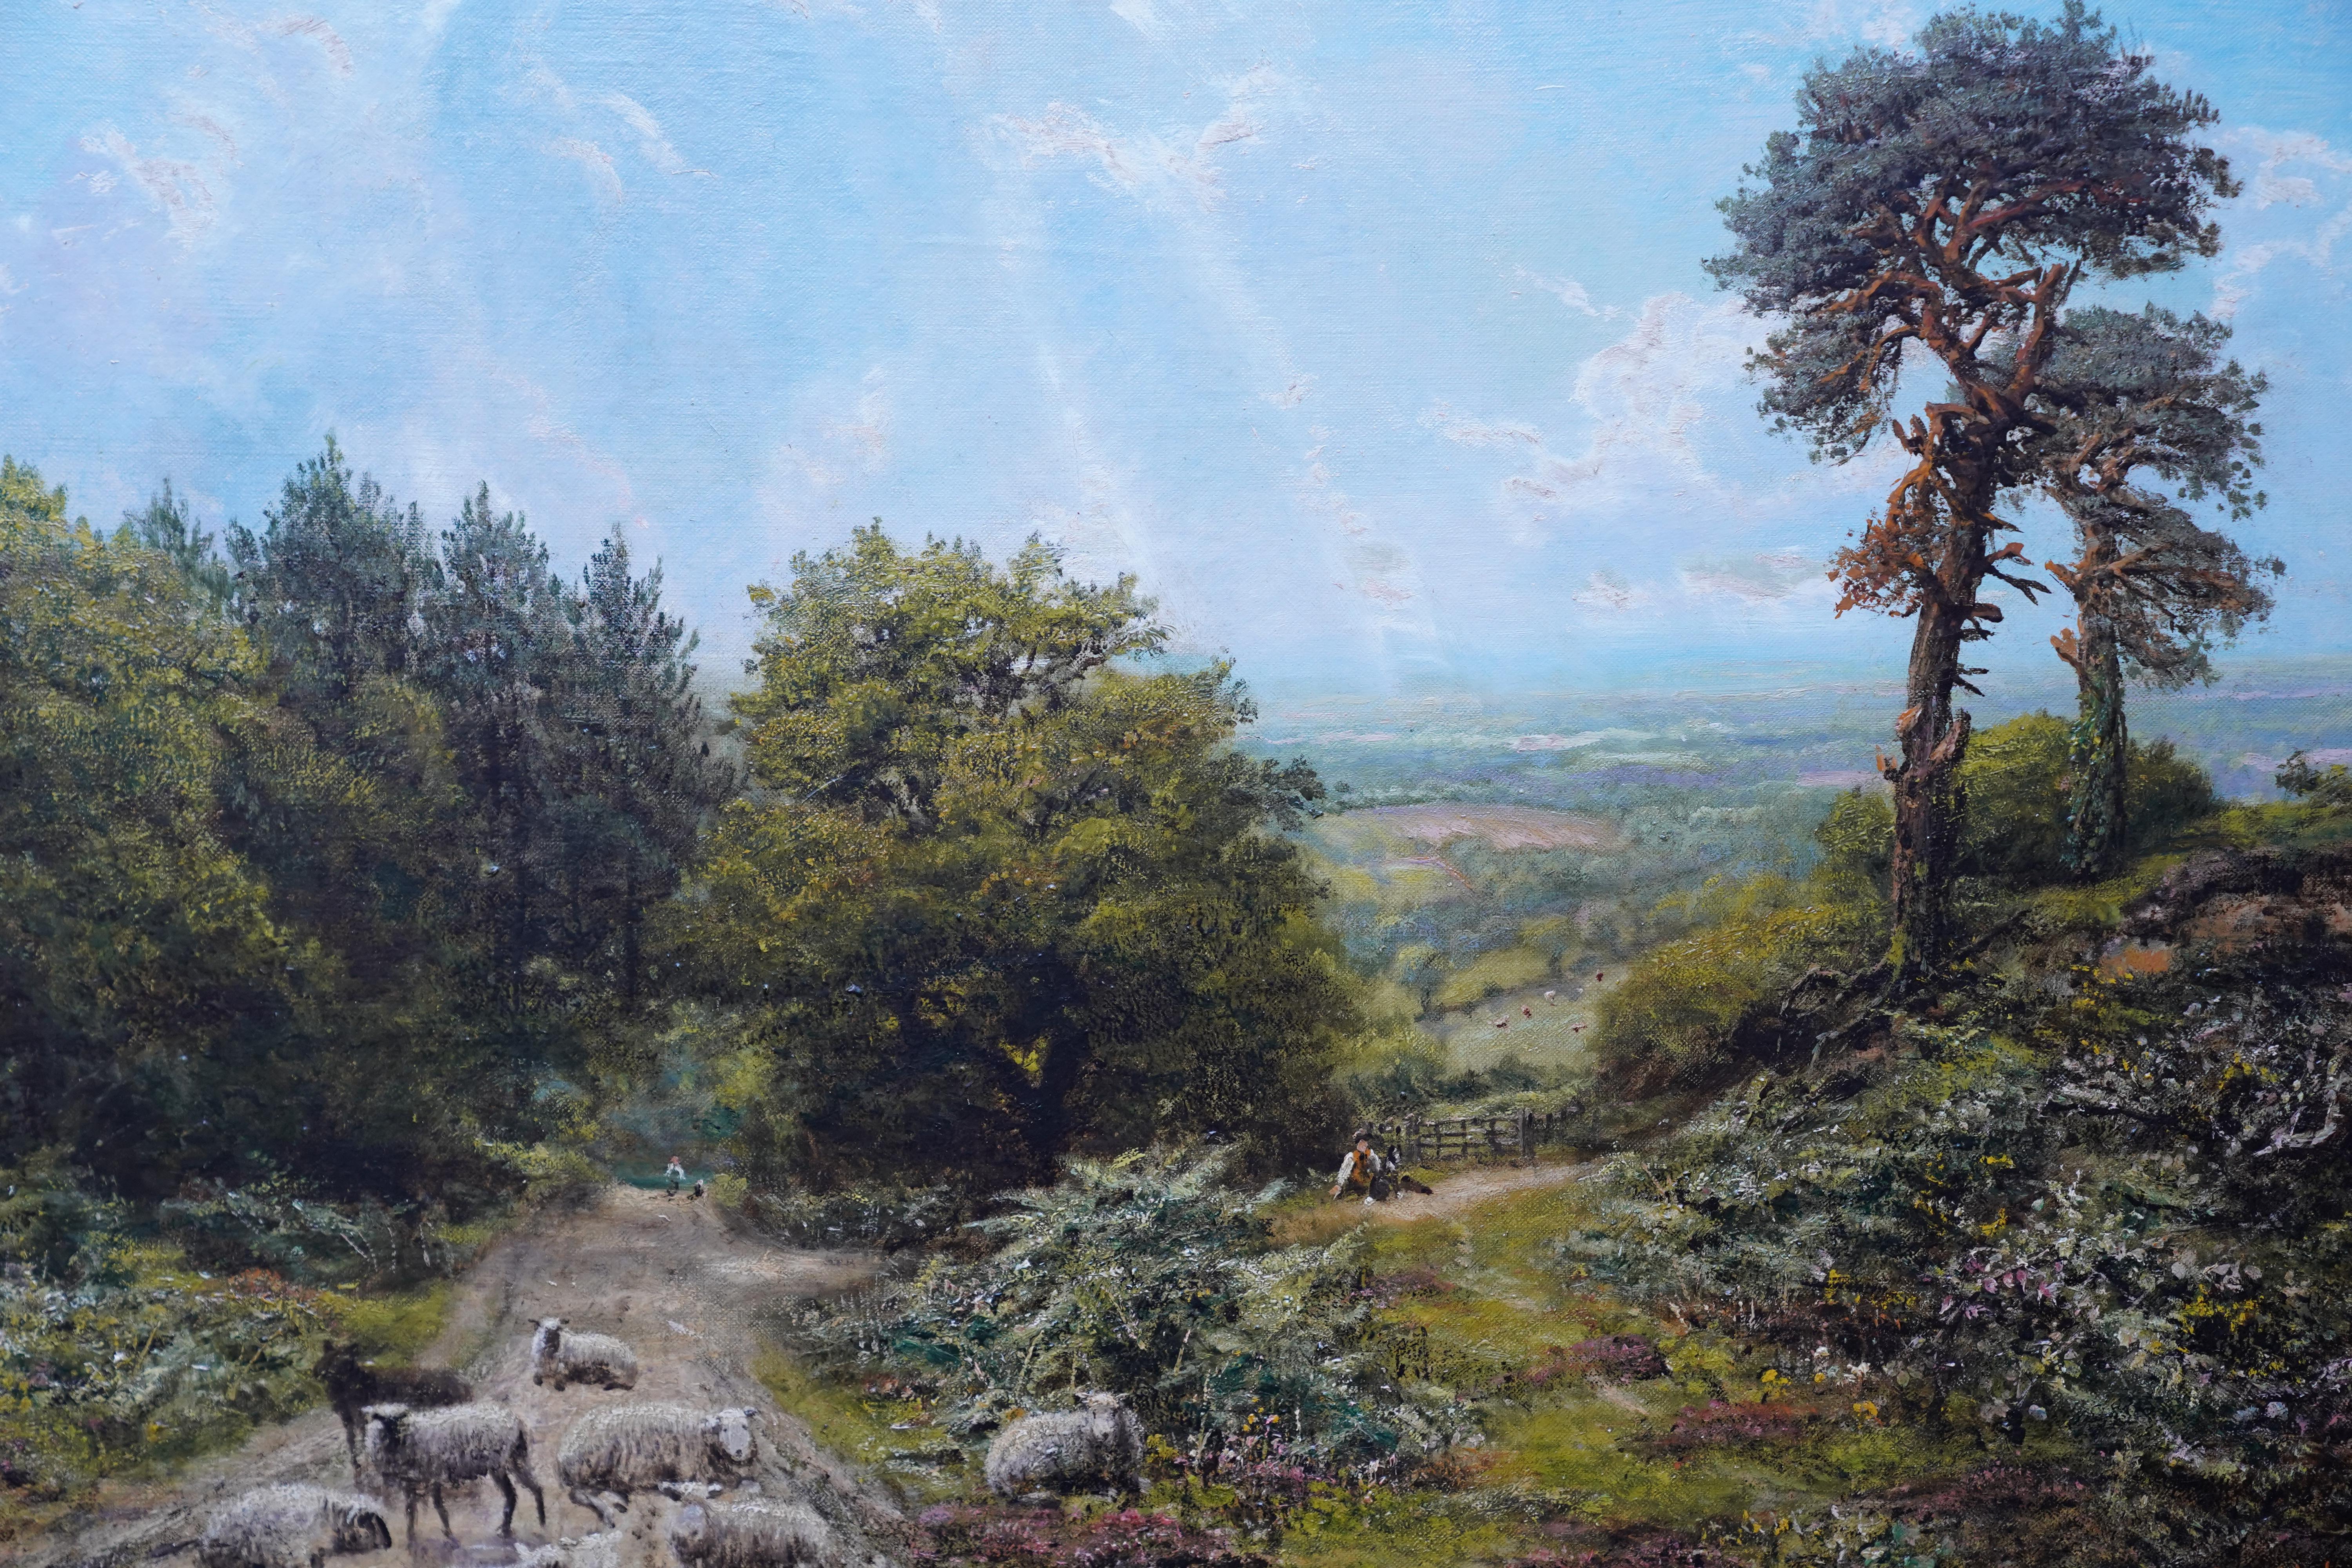 Sheep in a Surrey Landscape - British Victorian art sunny landscape oil painting - Realist Painting by George William Mote